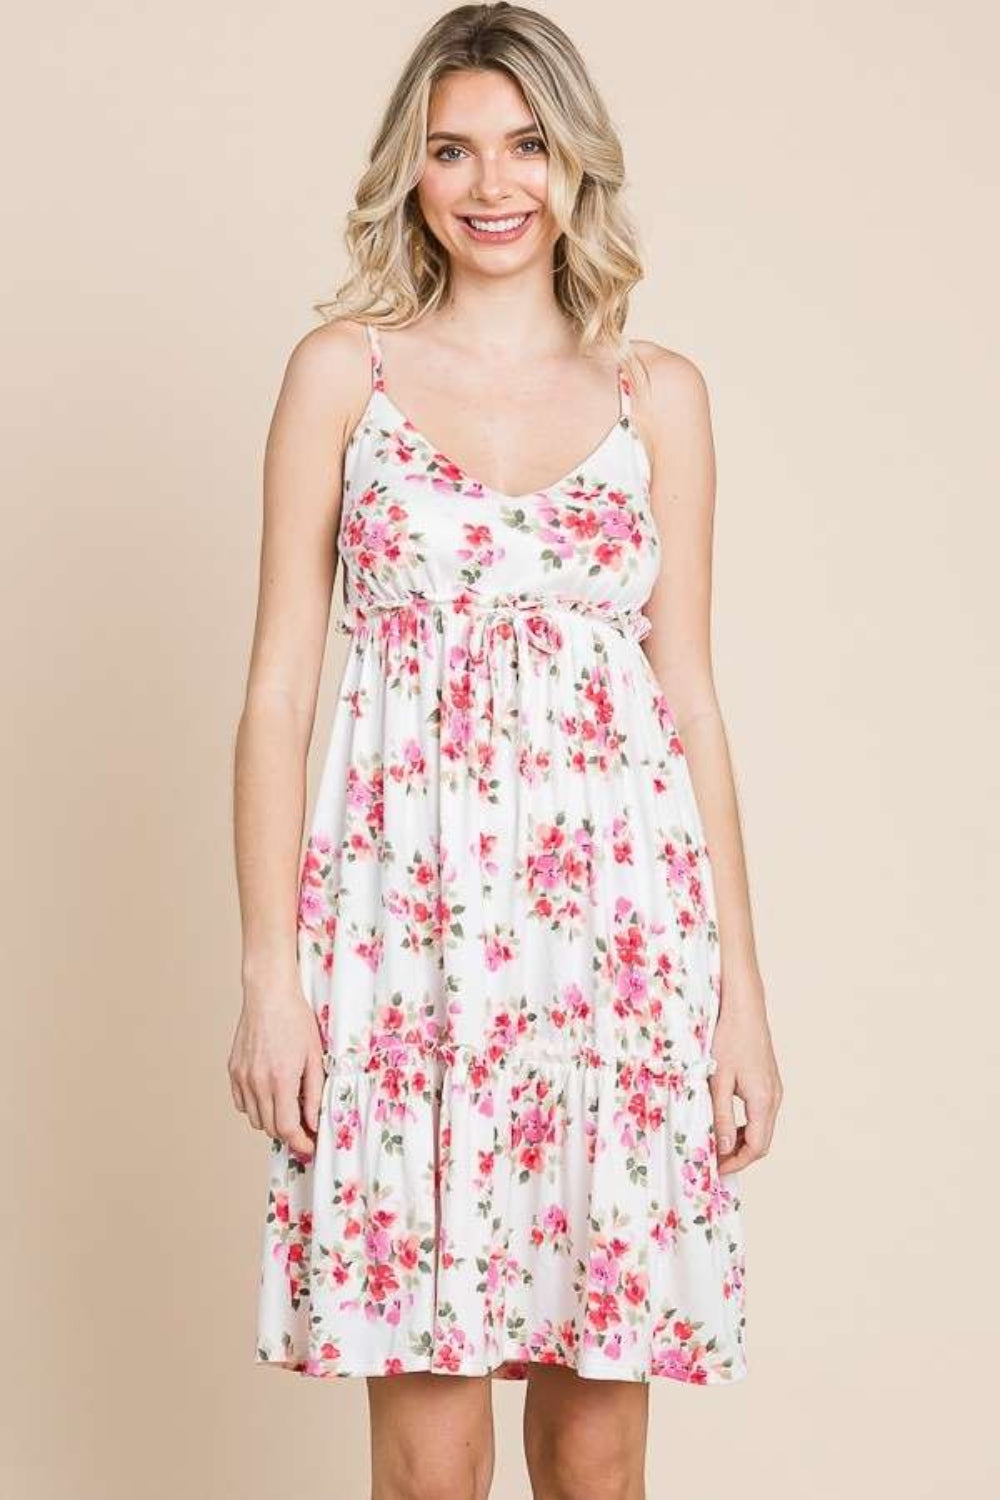 ONLINE ONLY! Culture Code Full Size Floral Frill Cami Dress